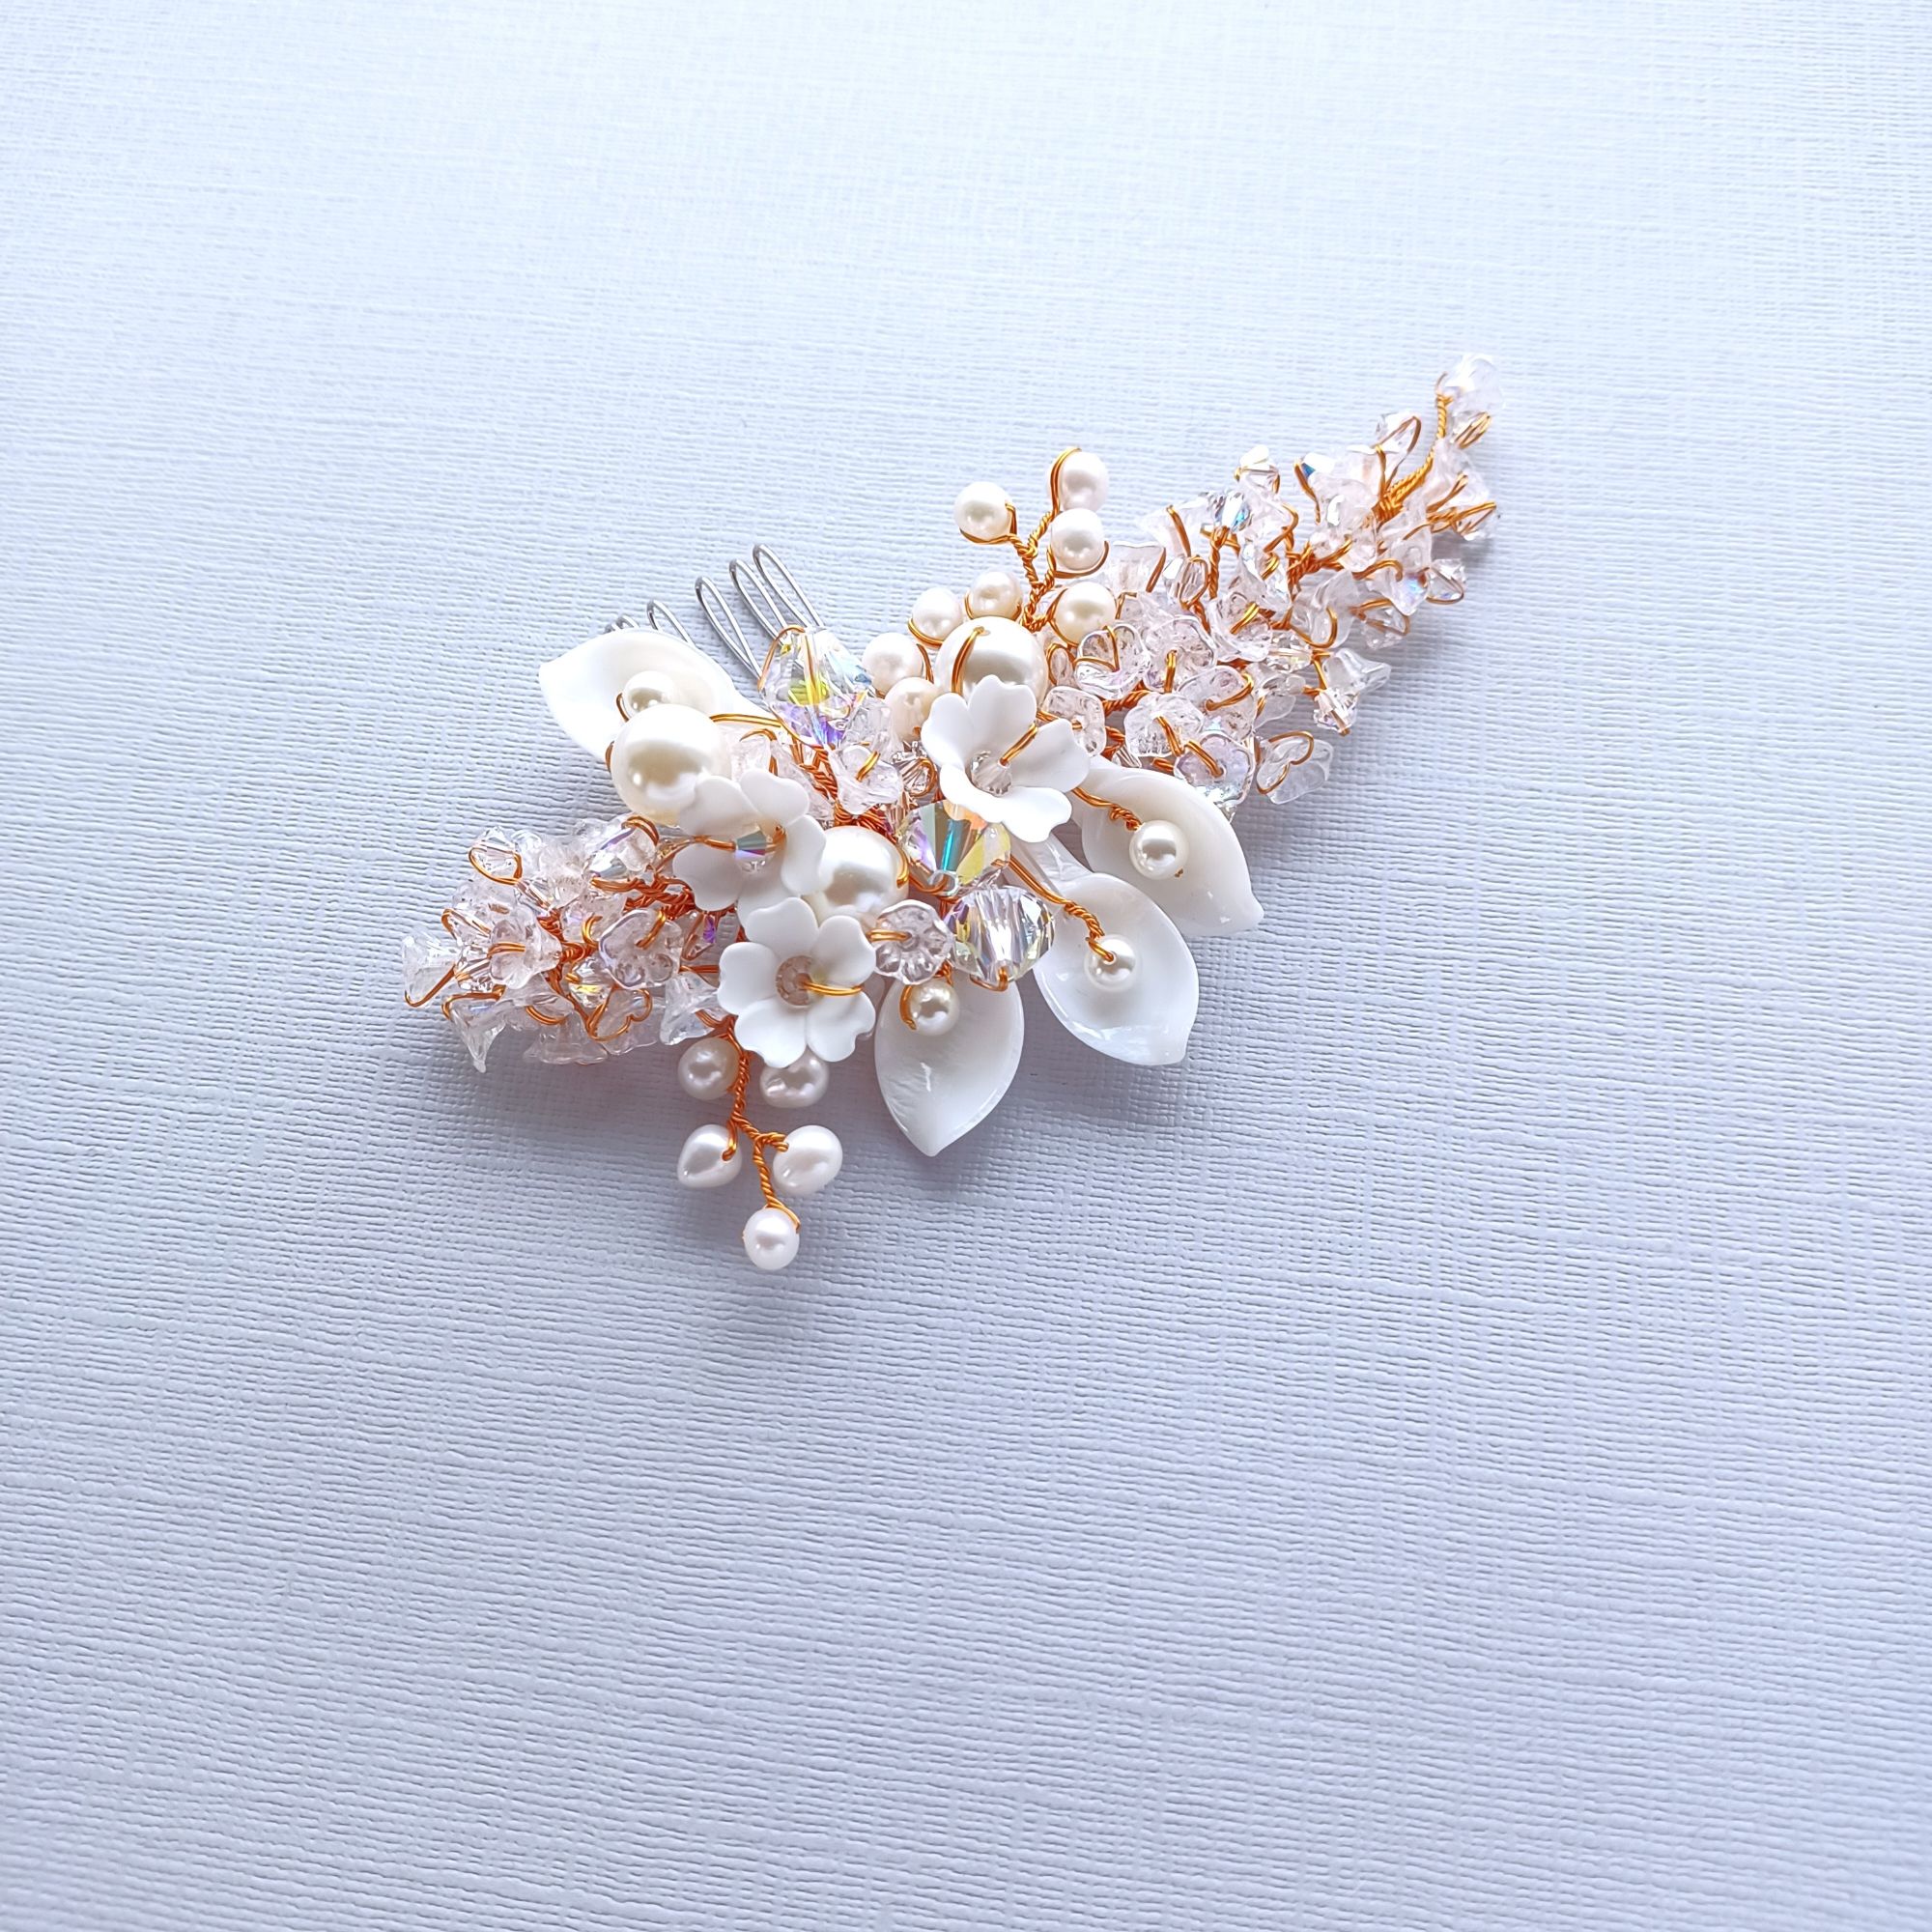 Handmade bridal wedding hair accessories and headpieces by Beady Bride UK